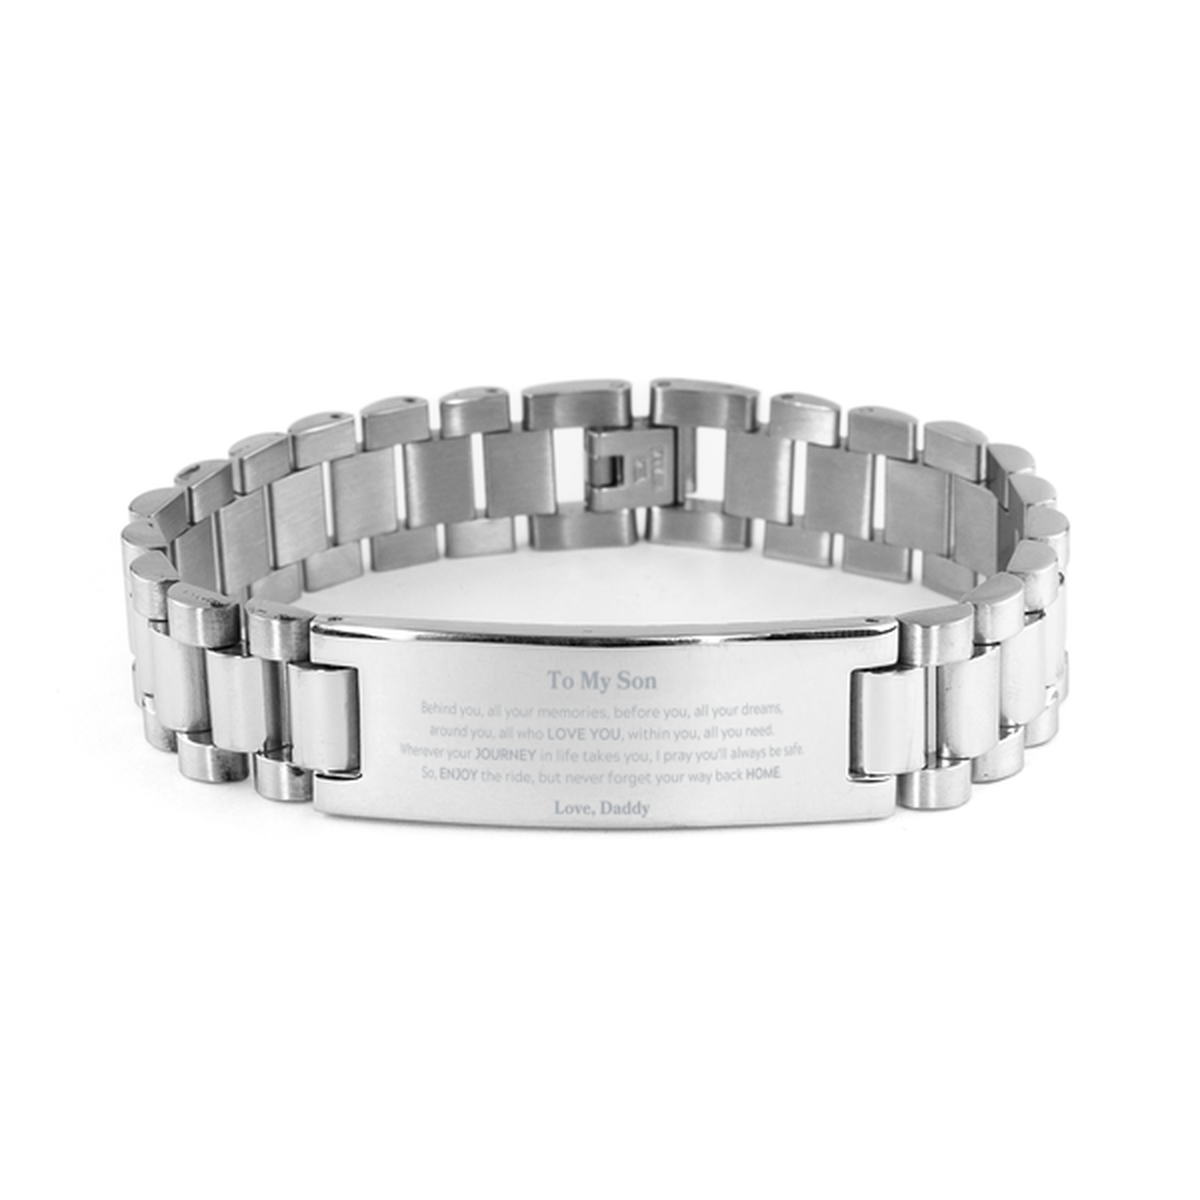 To My Son Graduation Gifts from Daddy, Son Ladder Stainless Steel Bracelet Christmas Birthday Gifts for Son Behind you, all your memories, before you, all your dreams. Love, Daddy